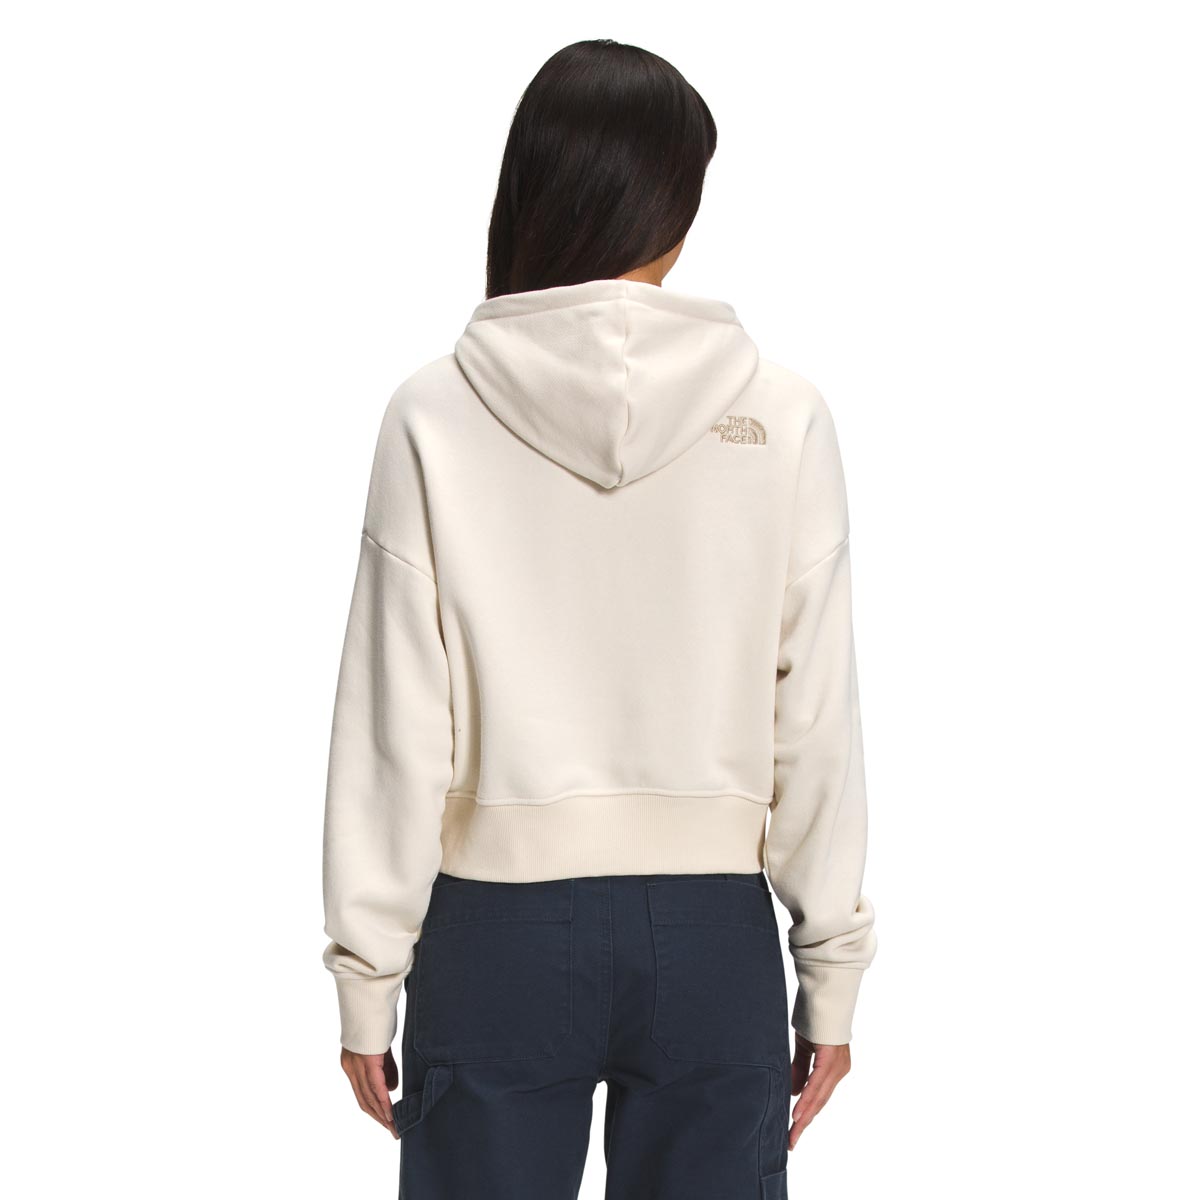 The North Face Women's Simple Logo Hoodie